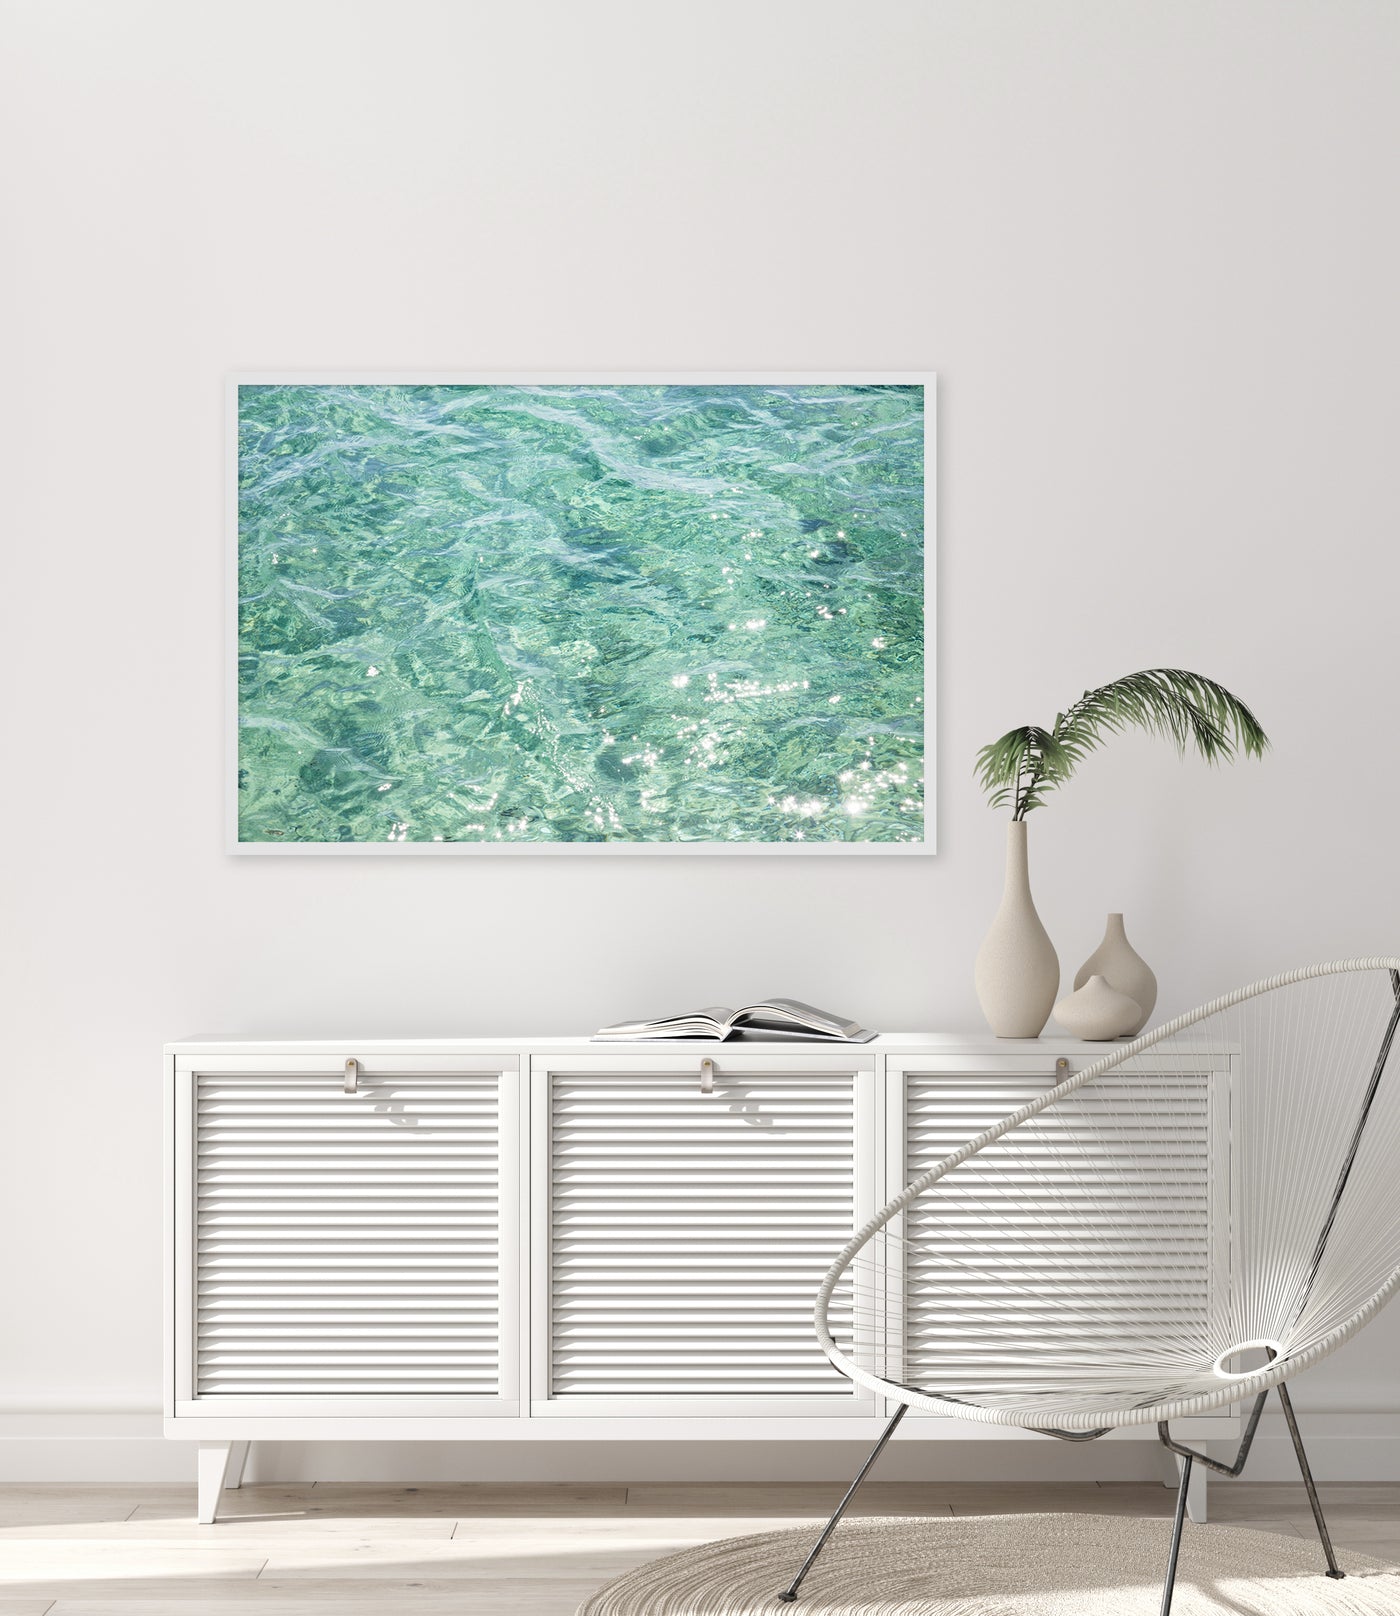 Abstract Water - Ocean art print by Cattie Coyle Photography above dresser in modern beach house